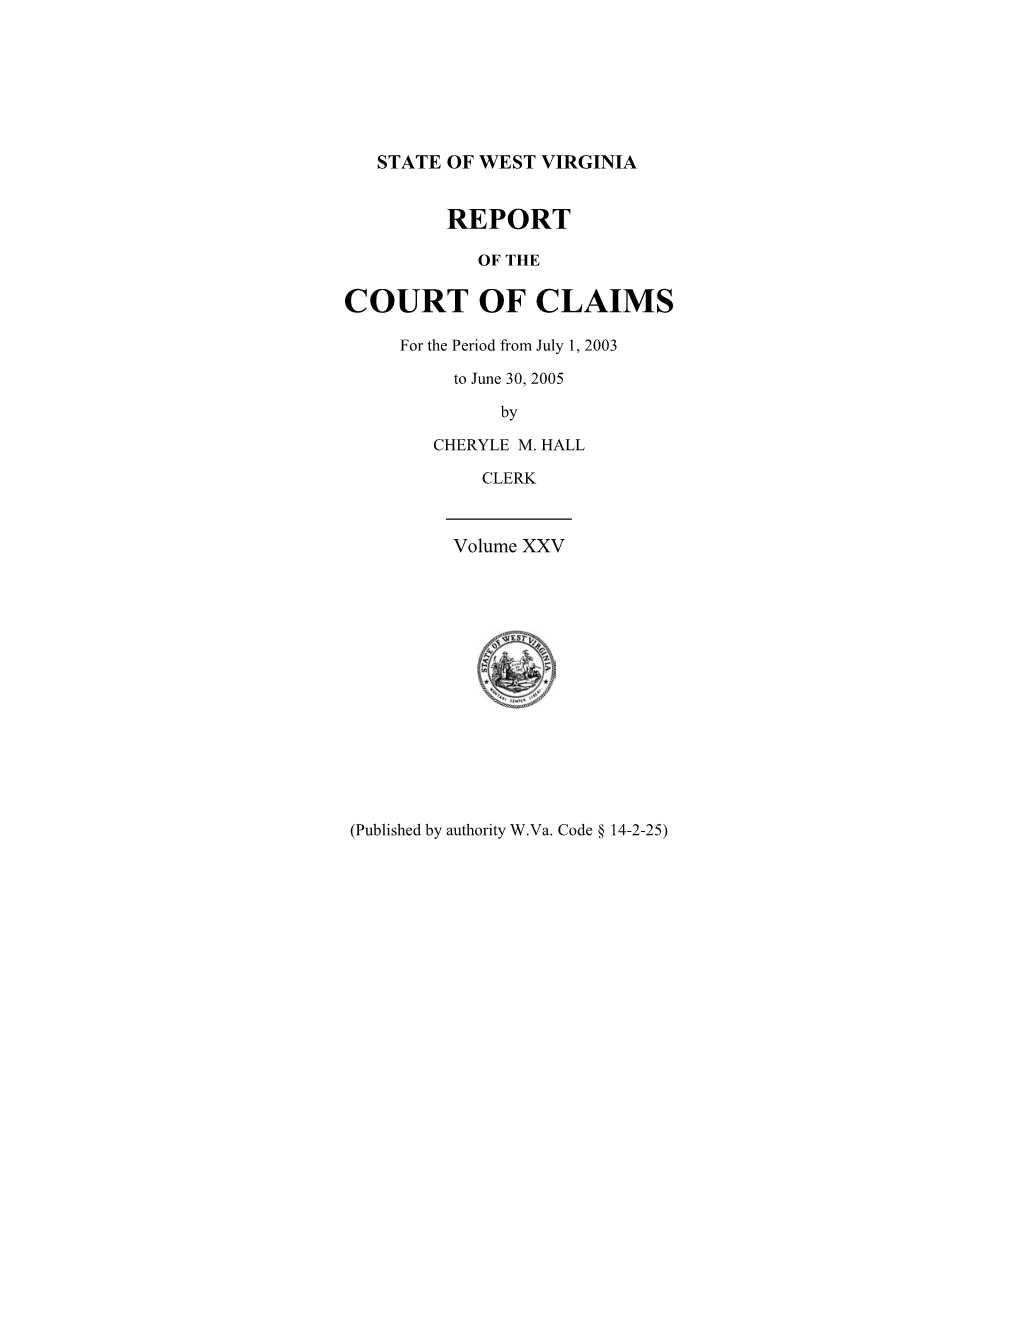 Court of Claims